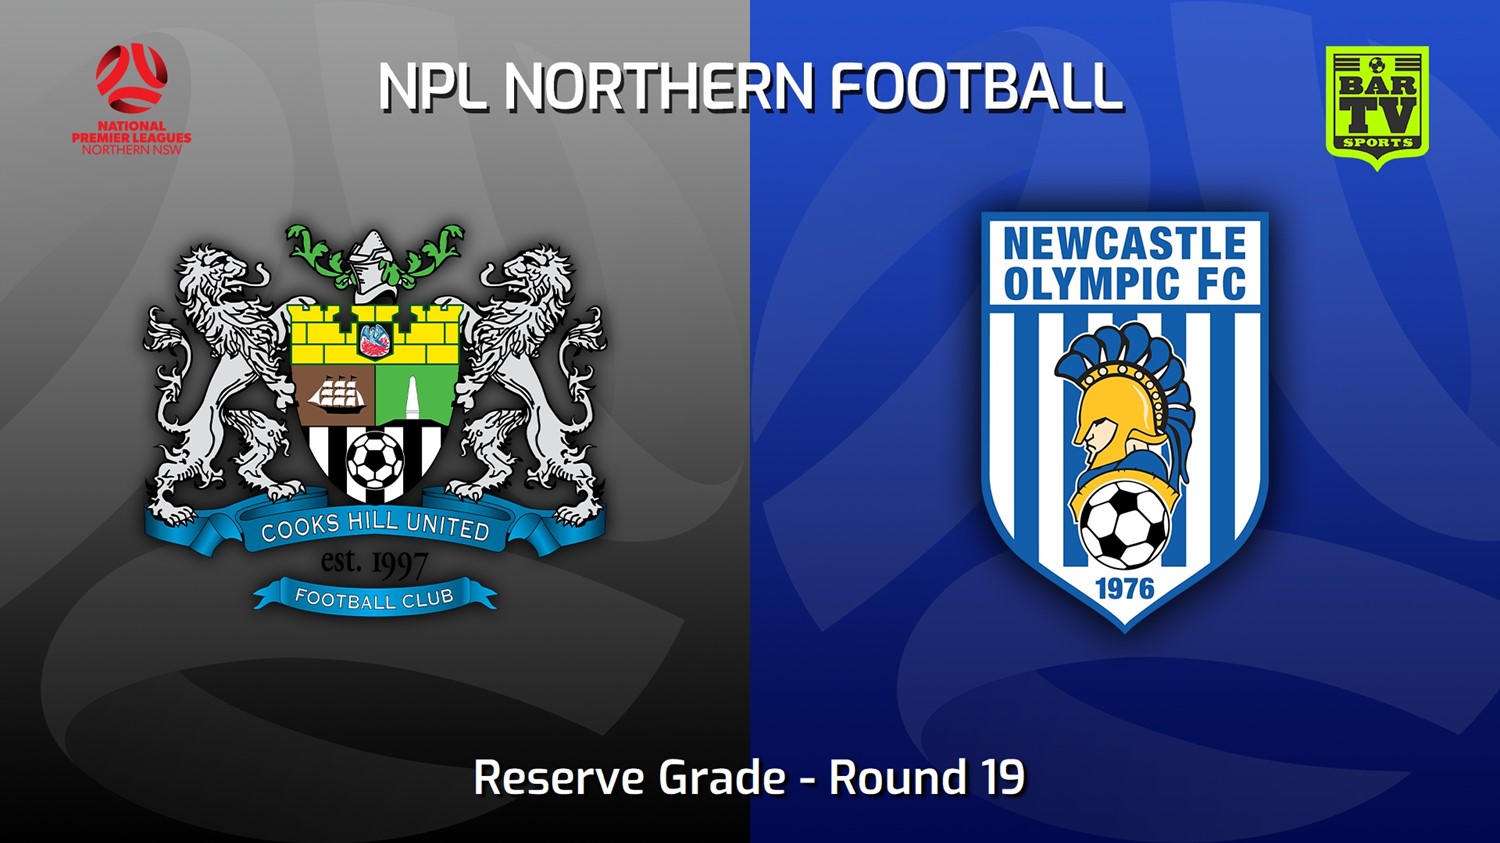 220716-NNSW NPLM Res Round 19 - Cooks Hill United FC (Res) v Newcastle Olympic Res Minigame Slate Image